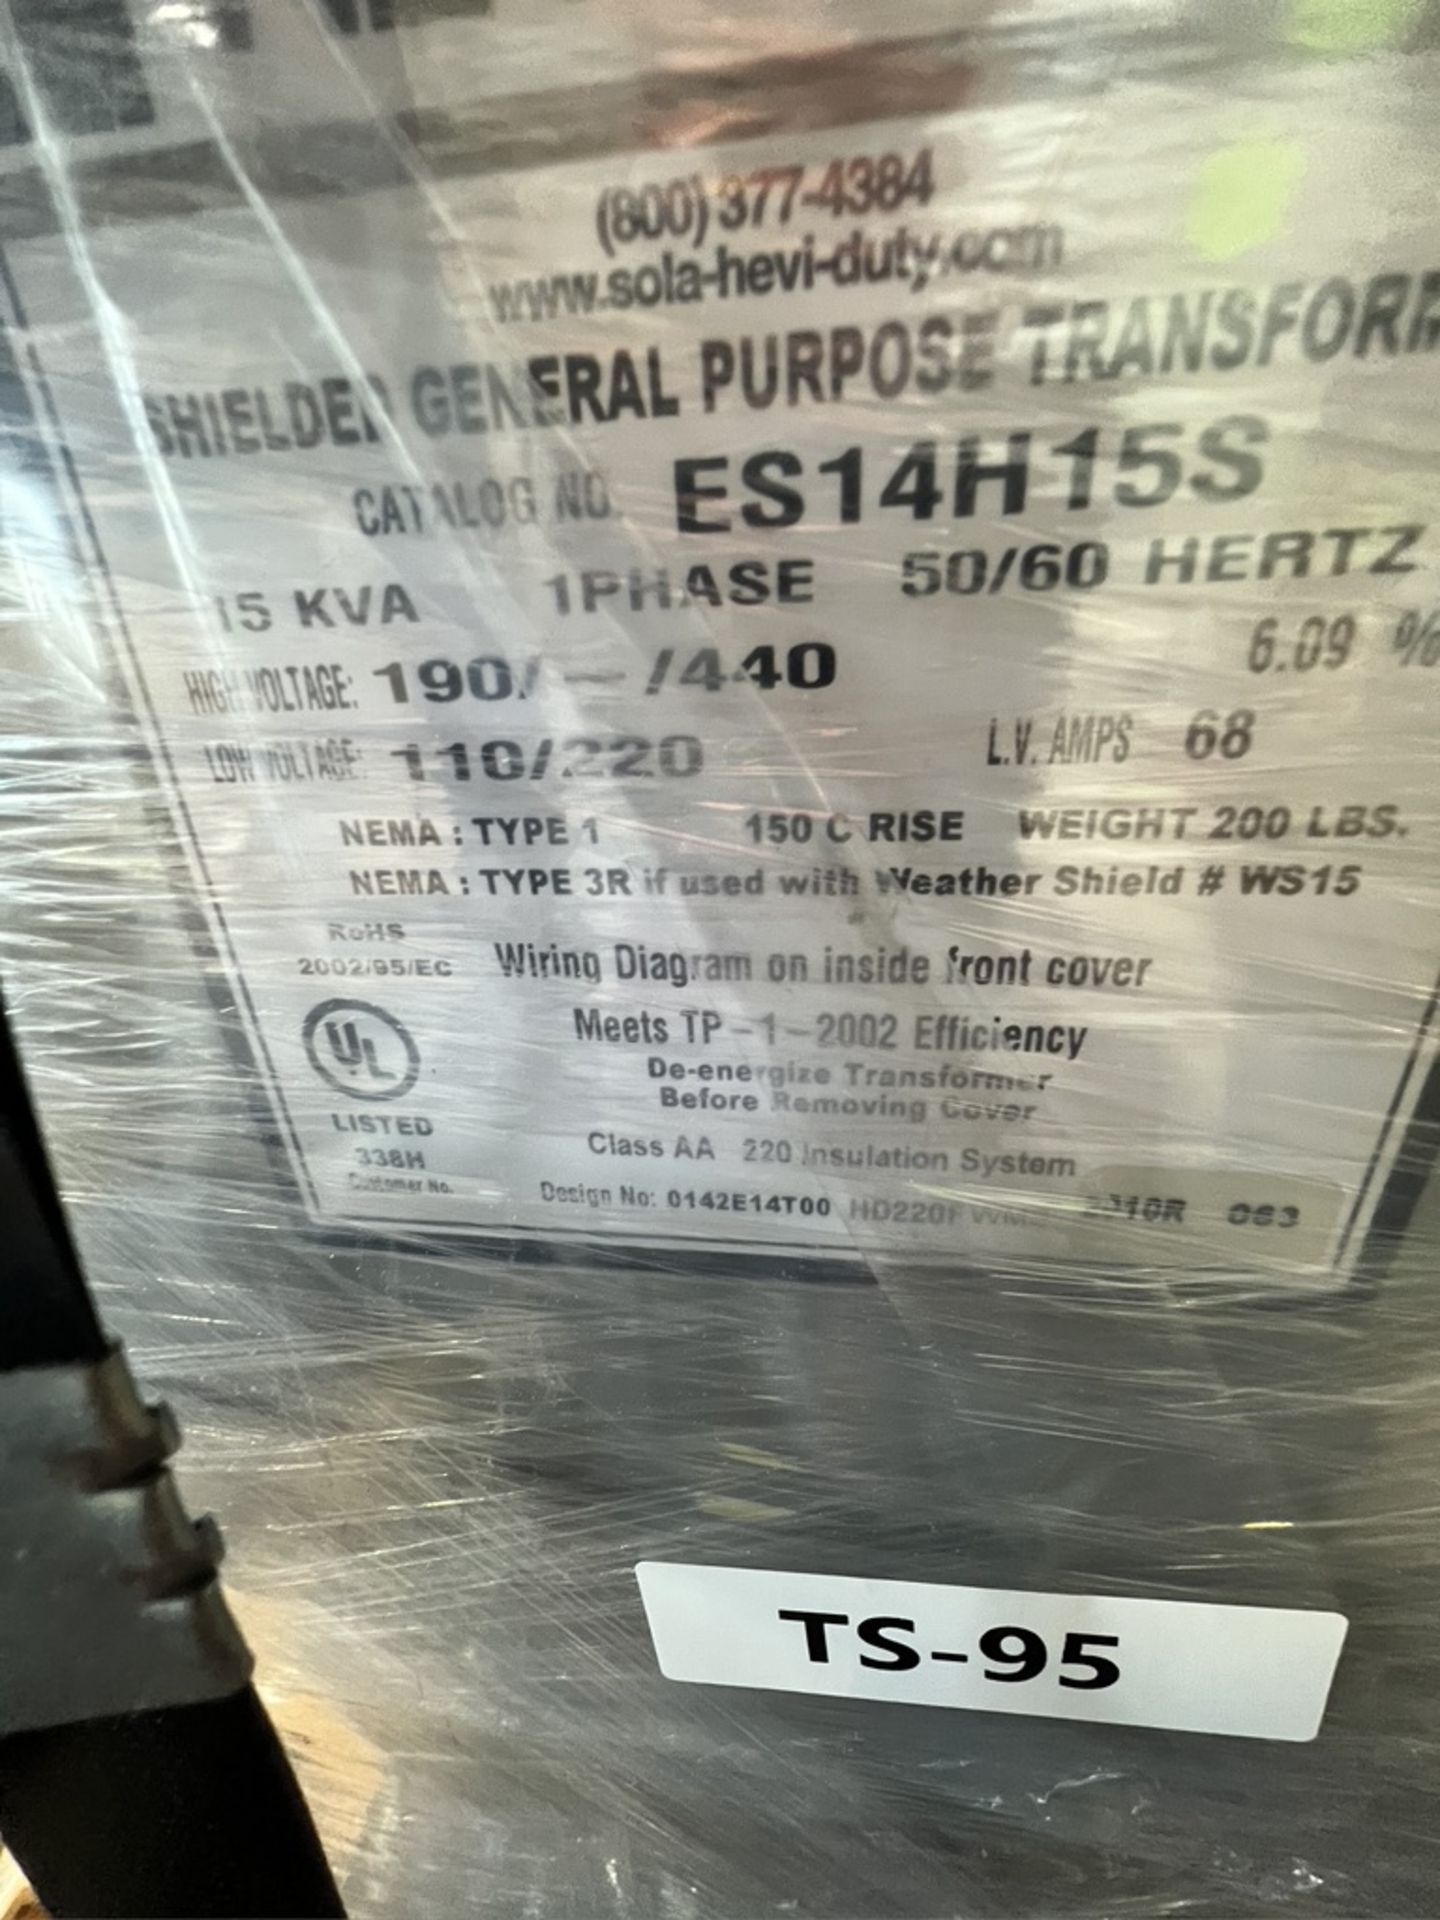 (2) TRANSFORMERS, (1) NEW Transformer 15 KVA, Emerson # ES14H15S ( 105184525 ), (1) GENERAL ELECTRIC - Image 11 of 13